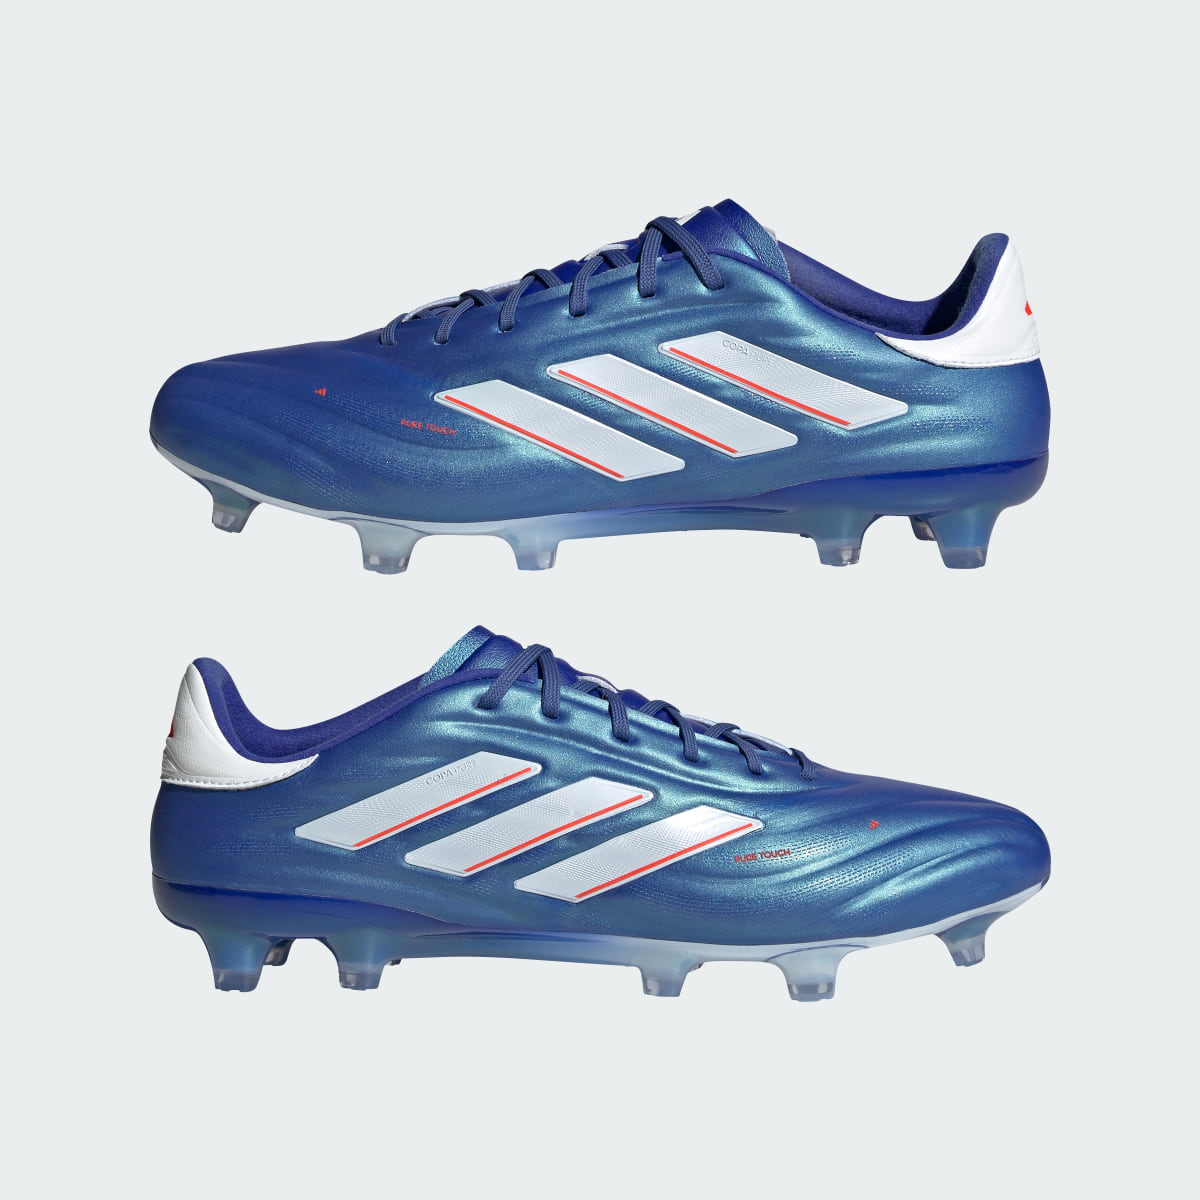 Adidas Copa Pure II.1 Firm Ground Boots. 11